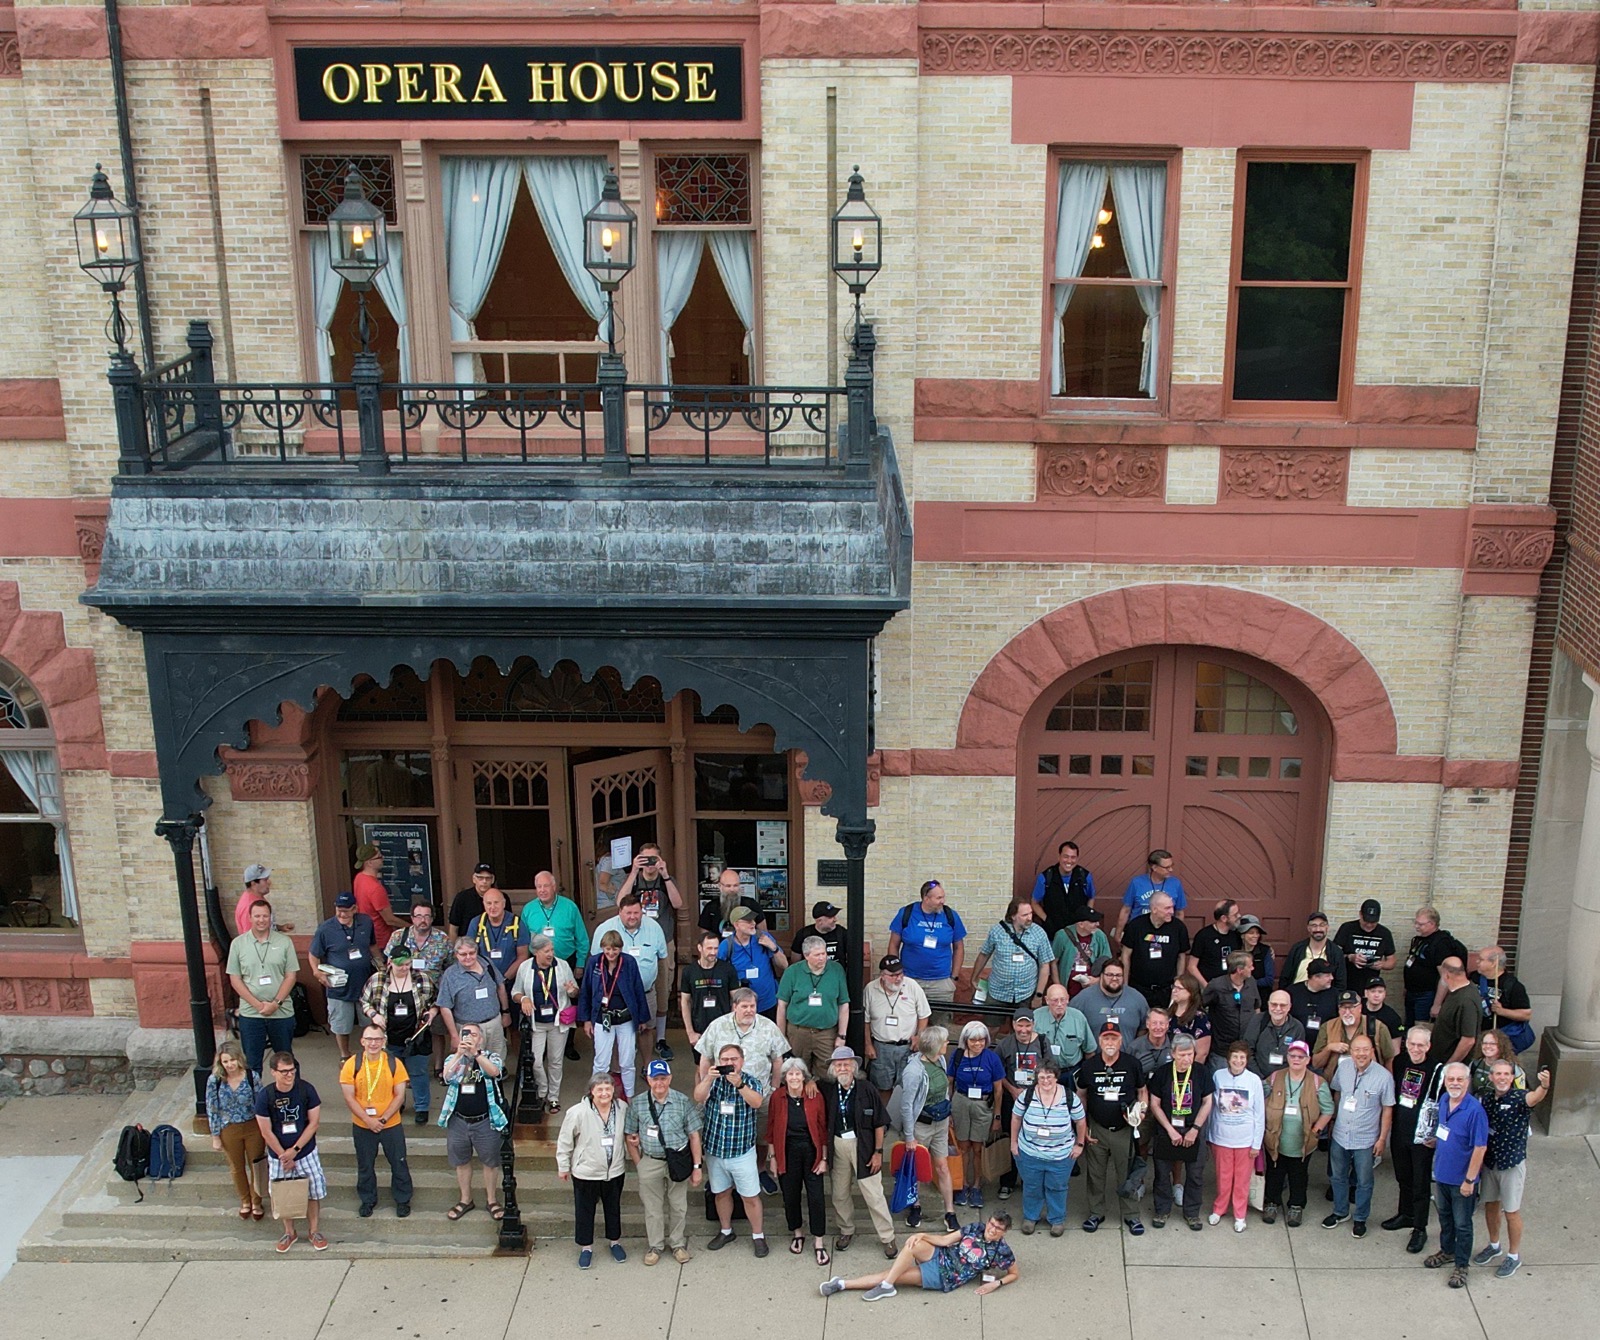 Group drone photo in front of the opera house and stage left